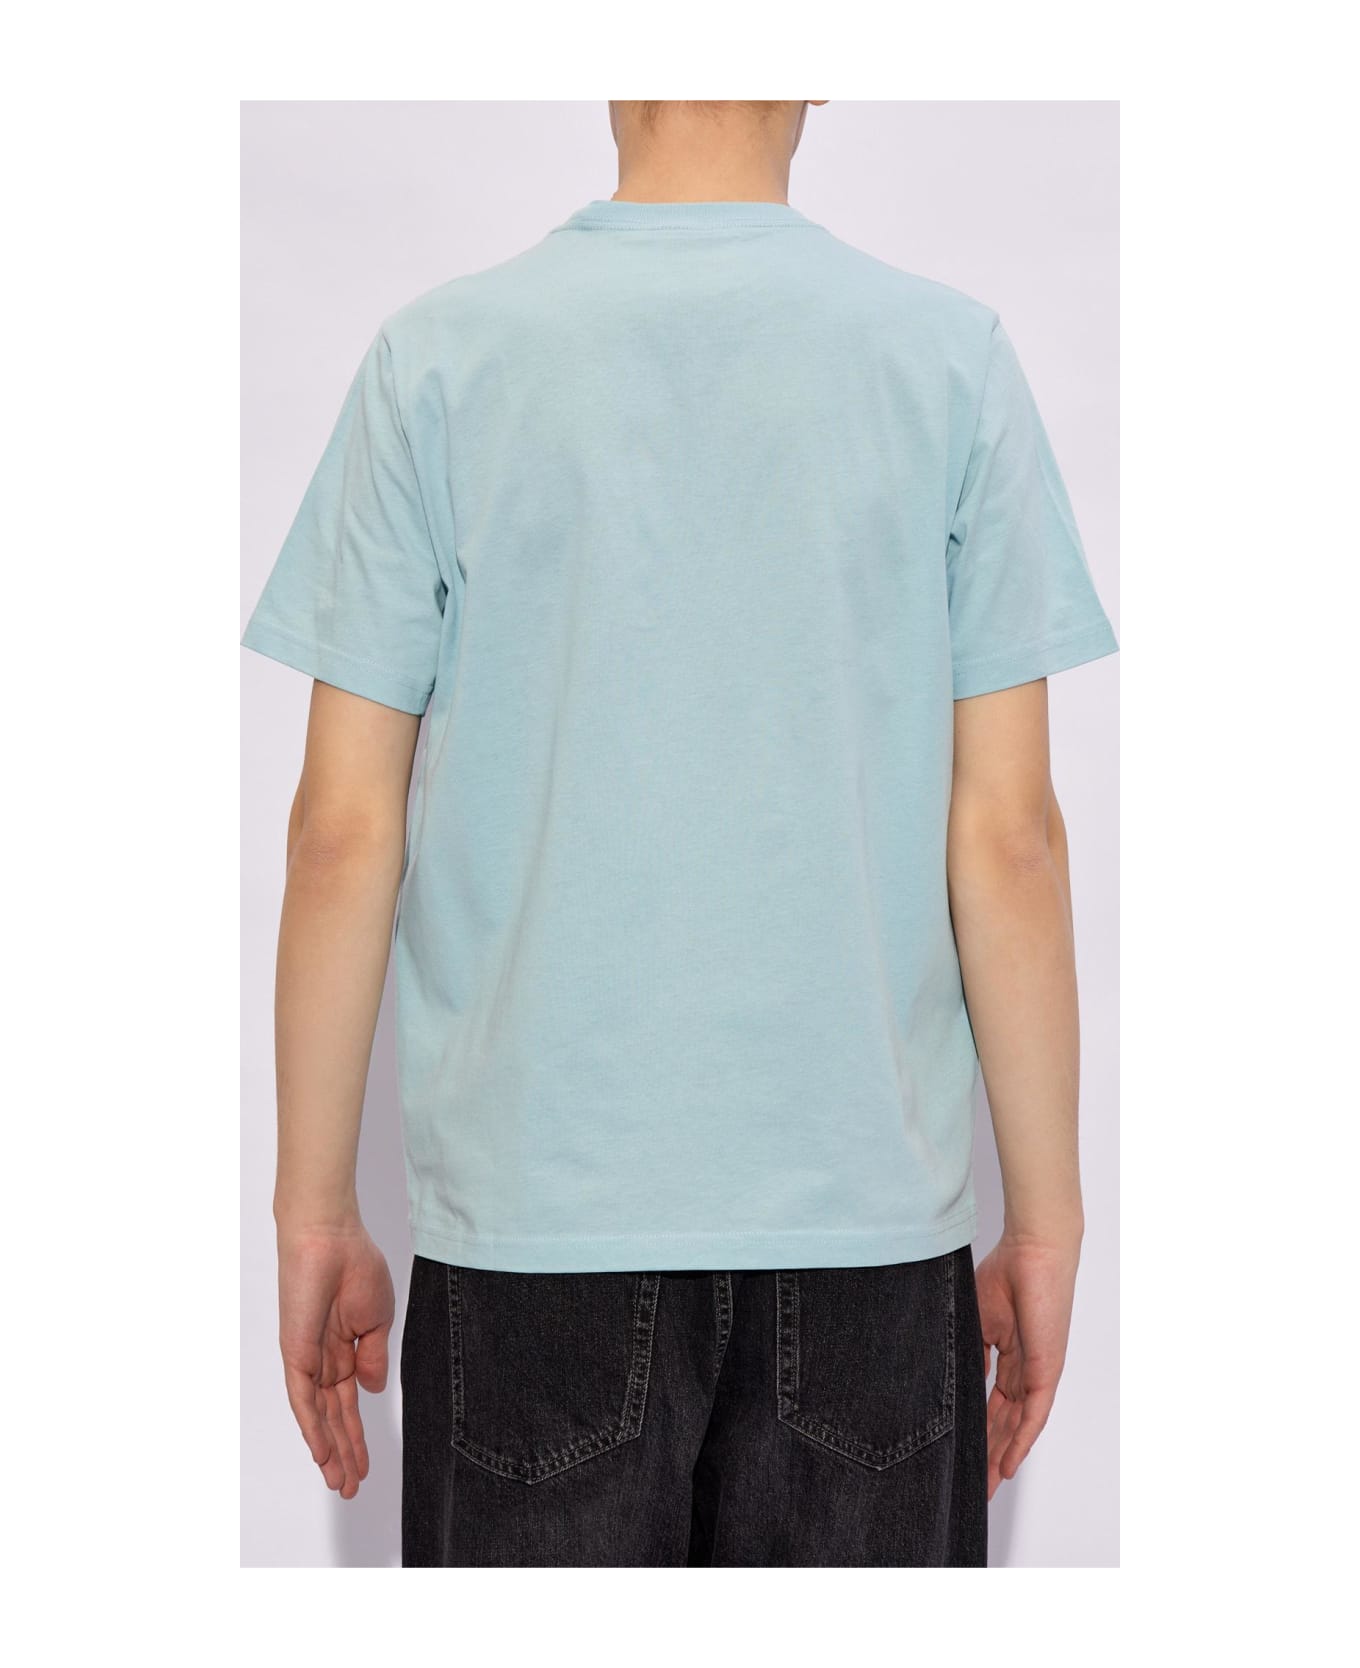 Paul Smith Ps Paul Smith Printed T-shirt - Clear Blue